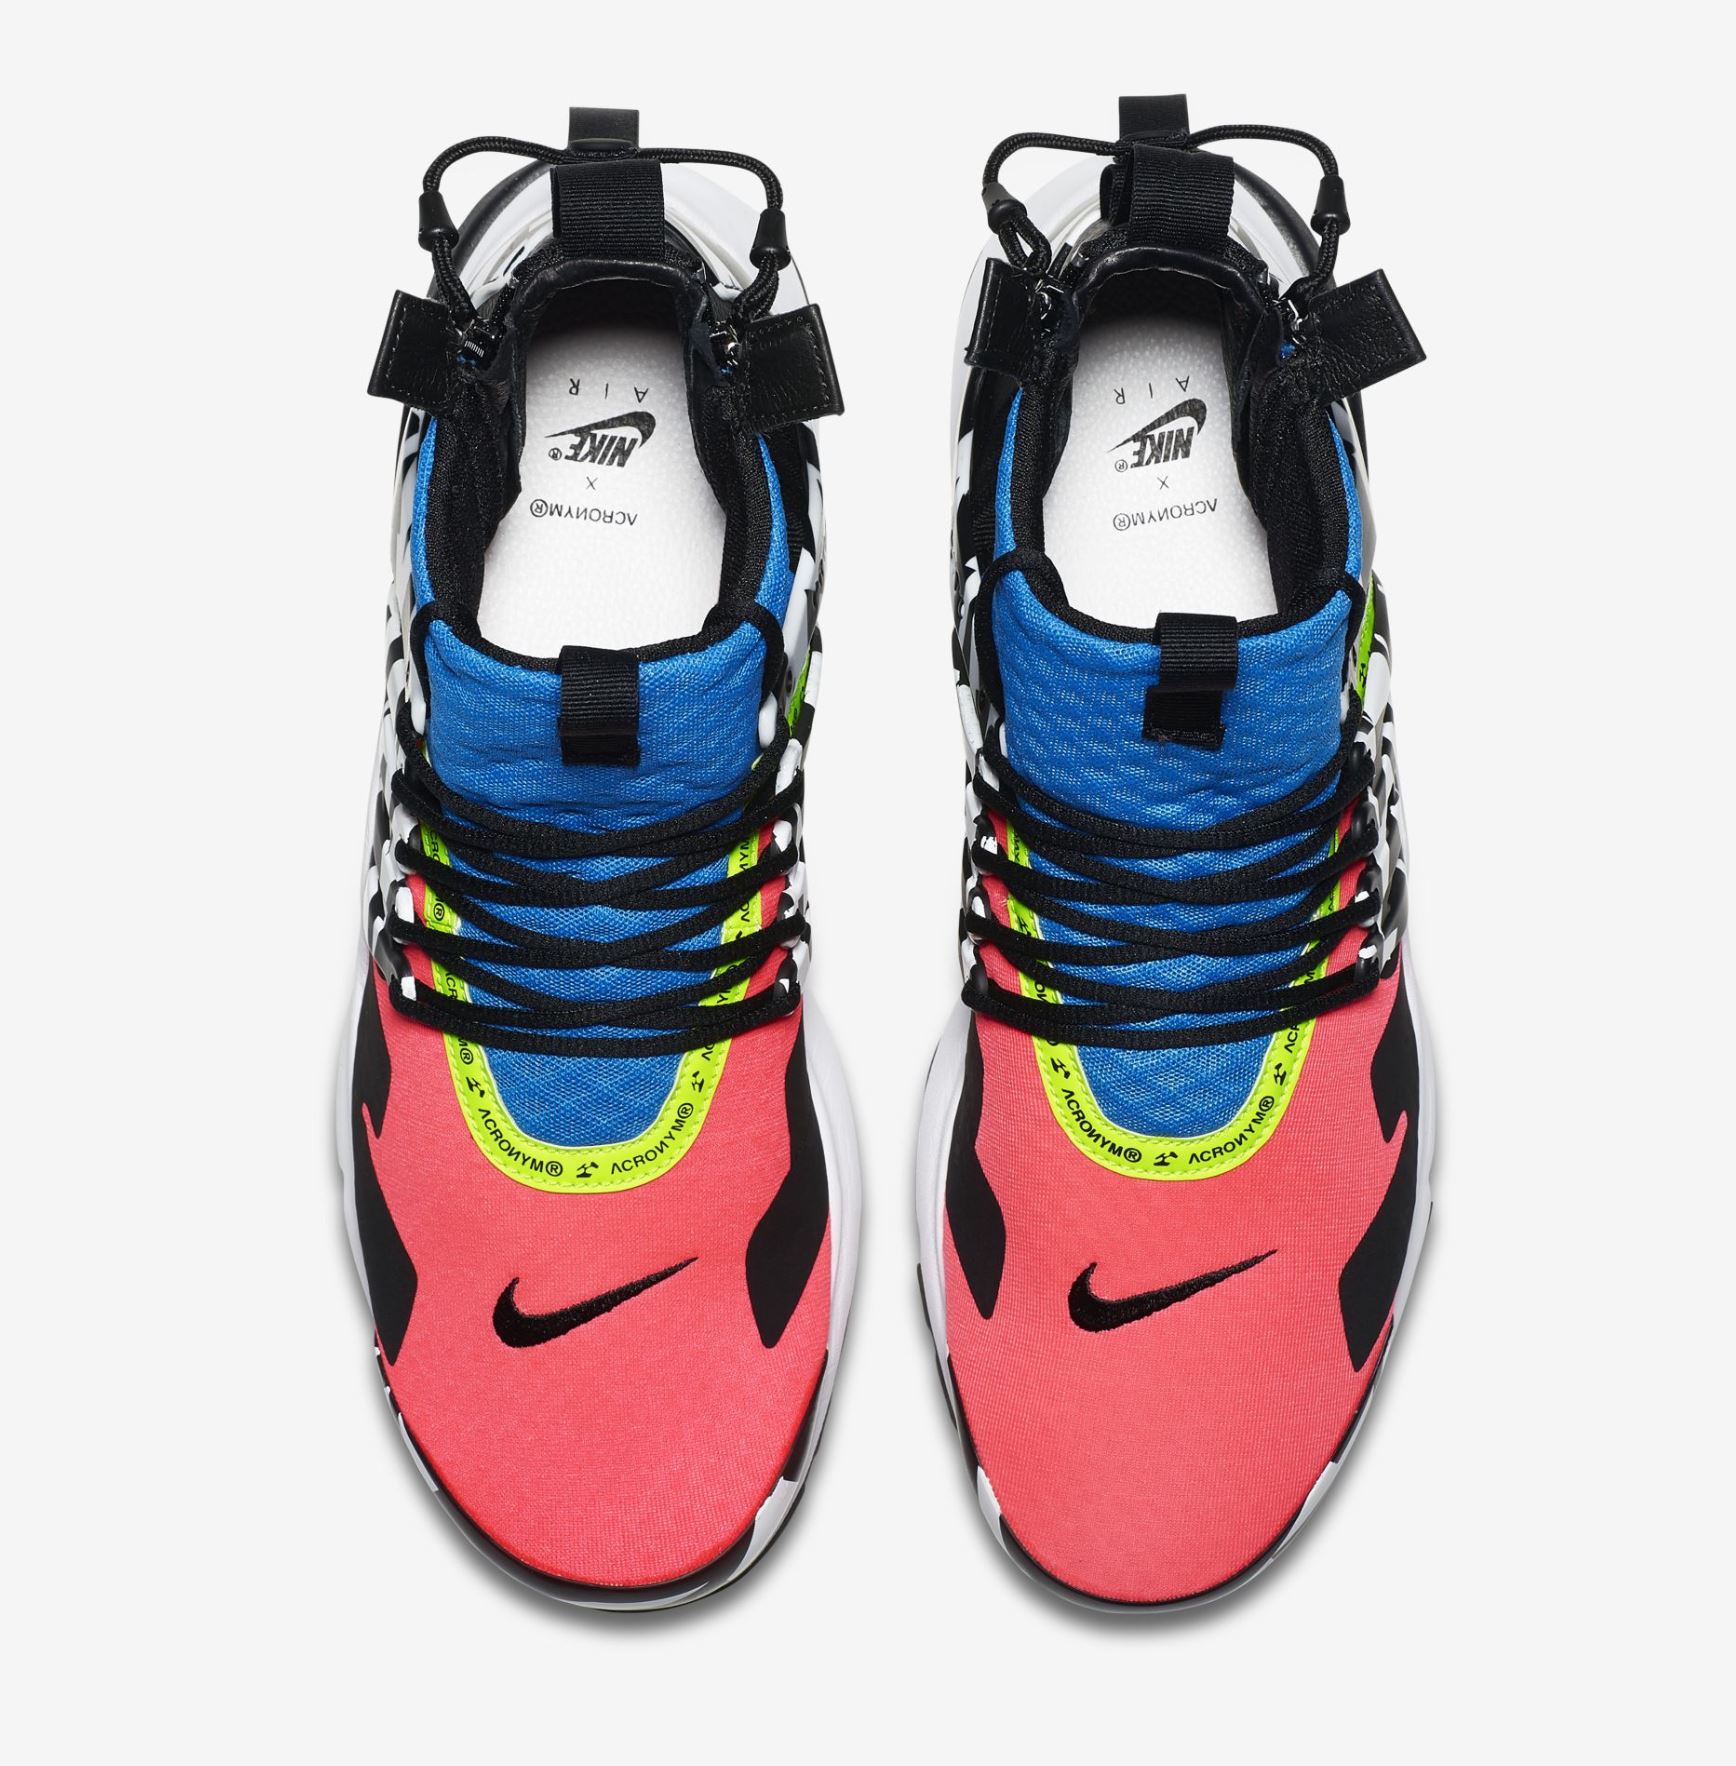 Season National anthem Privileged Official Look at a New ACRONYM x Nike Presto Mid for 2018 - WearTesters